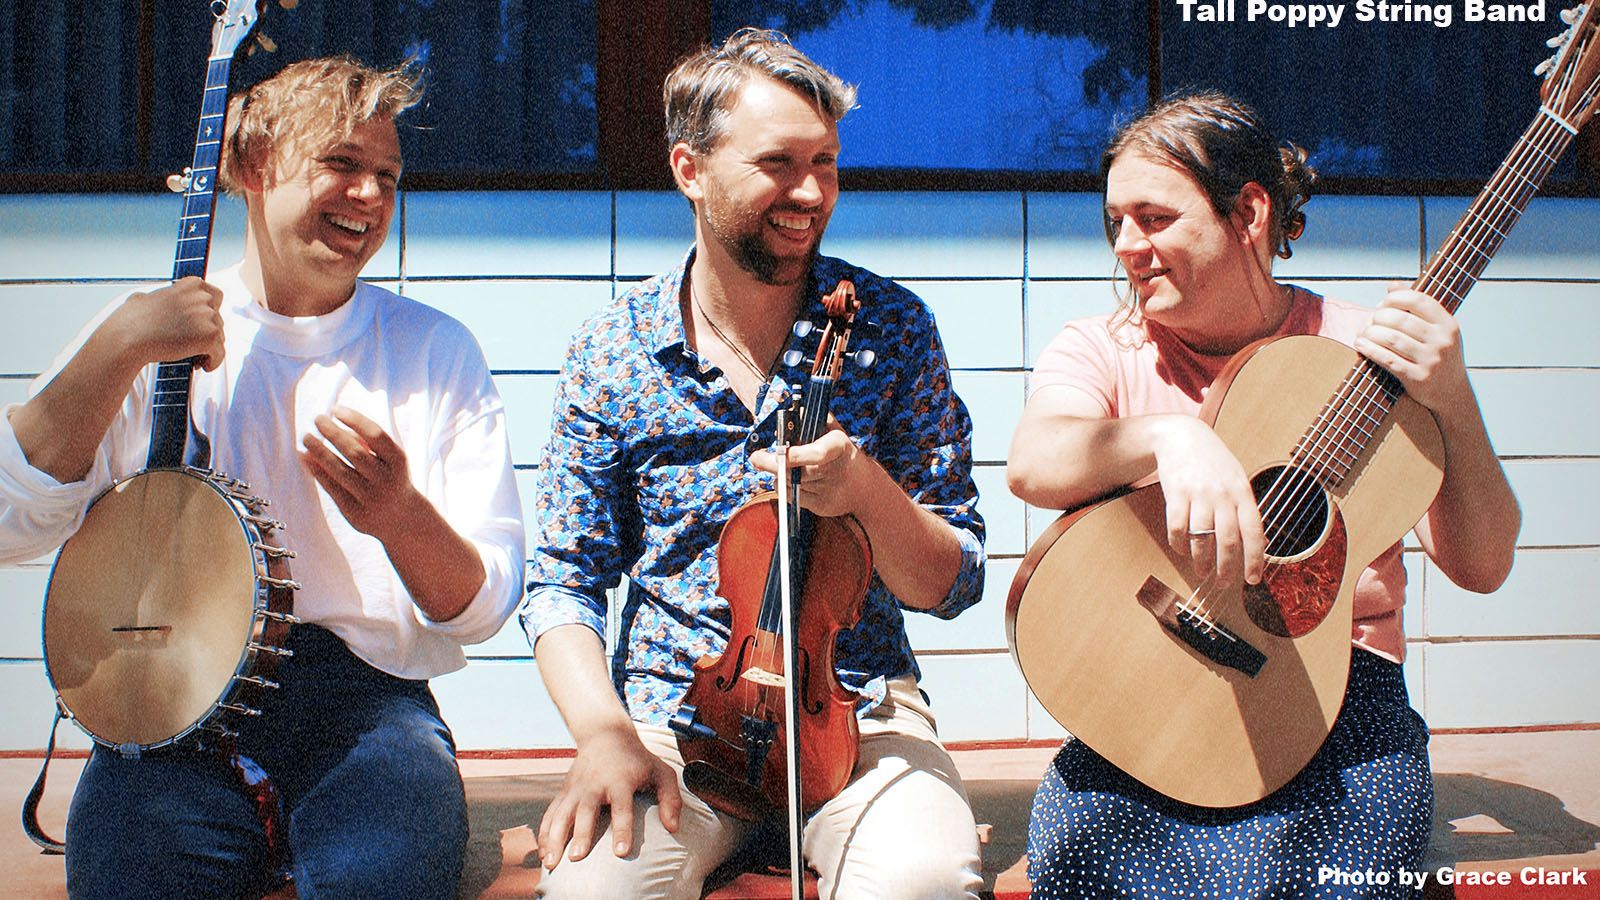 Tall Poppy String Band will be among the acts performing at April in The Garden.